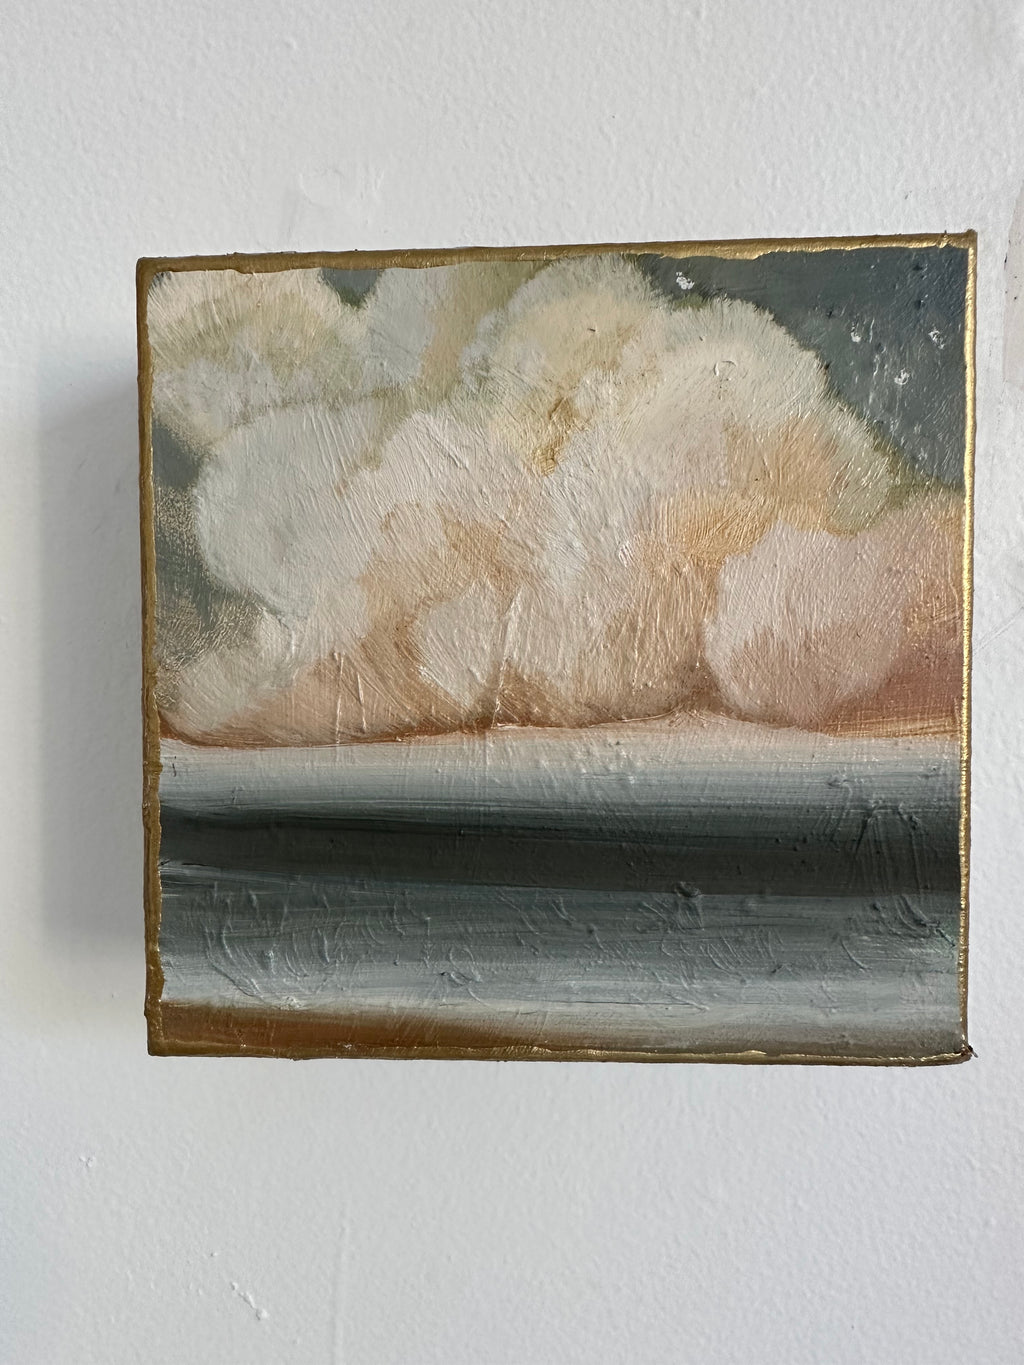 "Poet's Dream" 6" x 6" seascape in oil on canvas